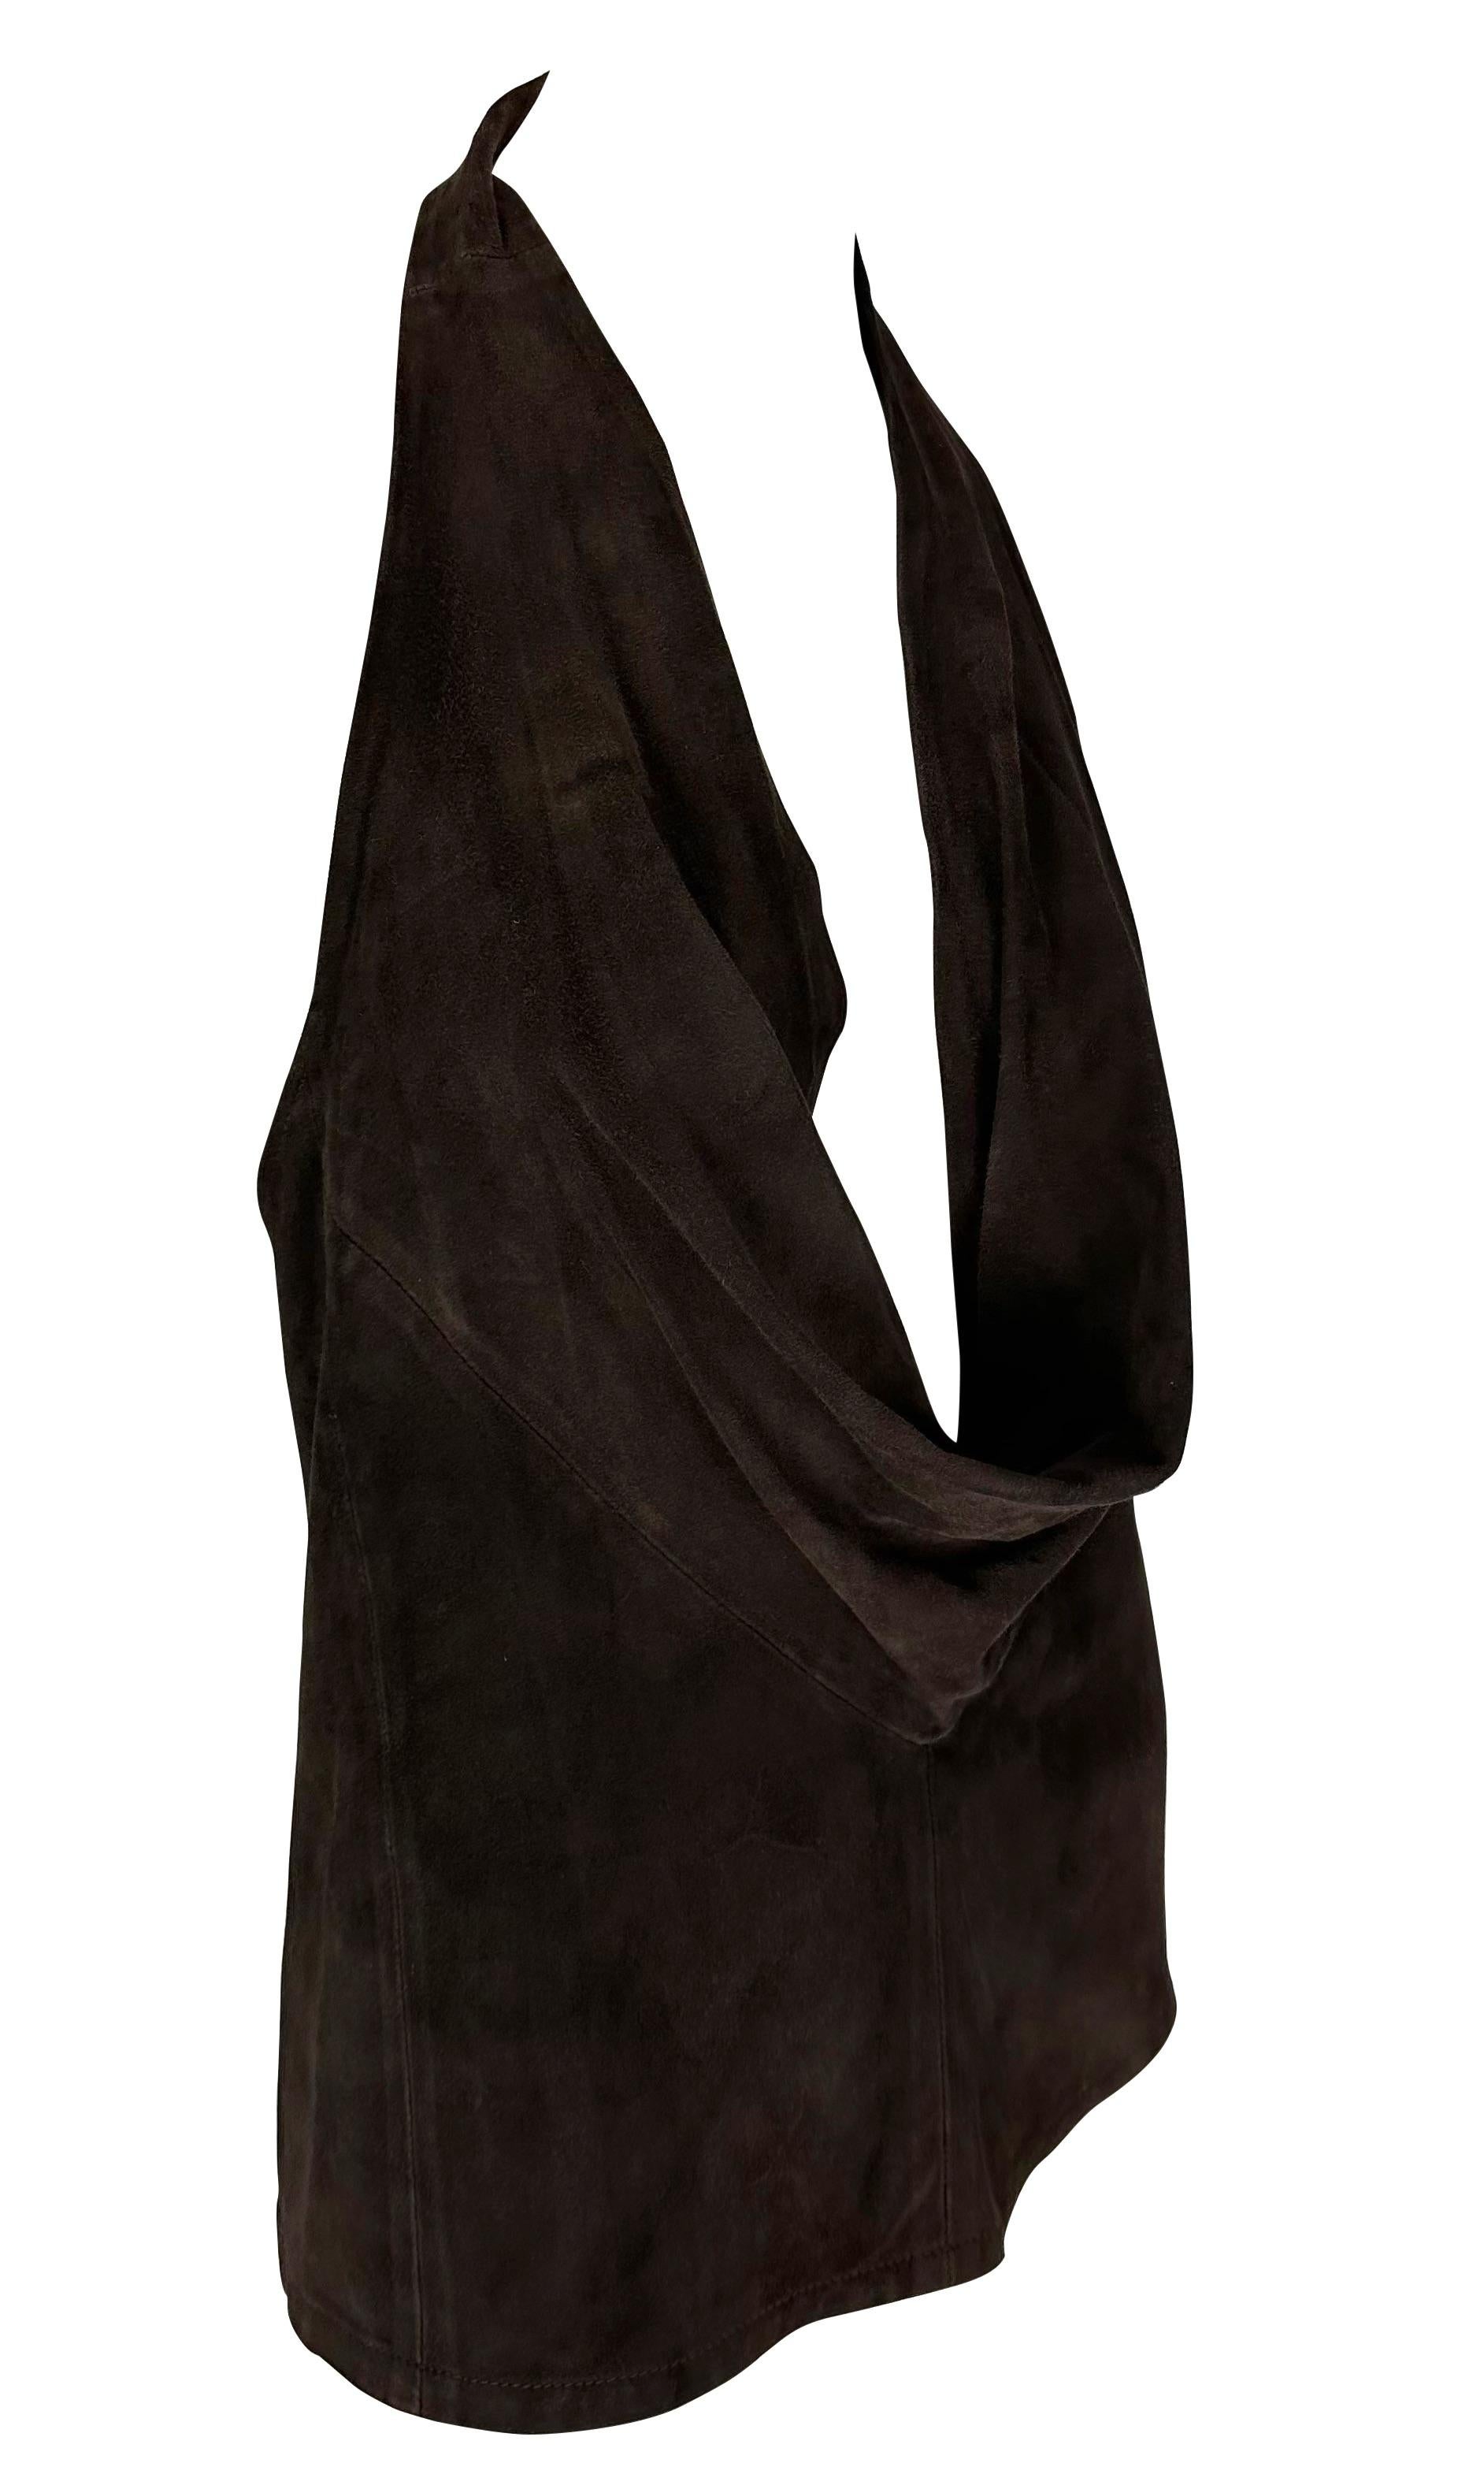 S/S 1997 Gucci by Tom Ford Brown Suede Brown Cowl Neck Halter Top Blouse Backless 1